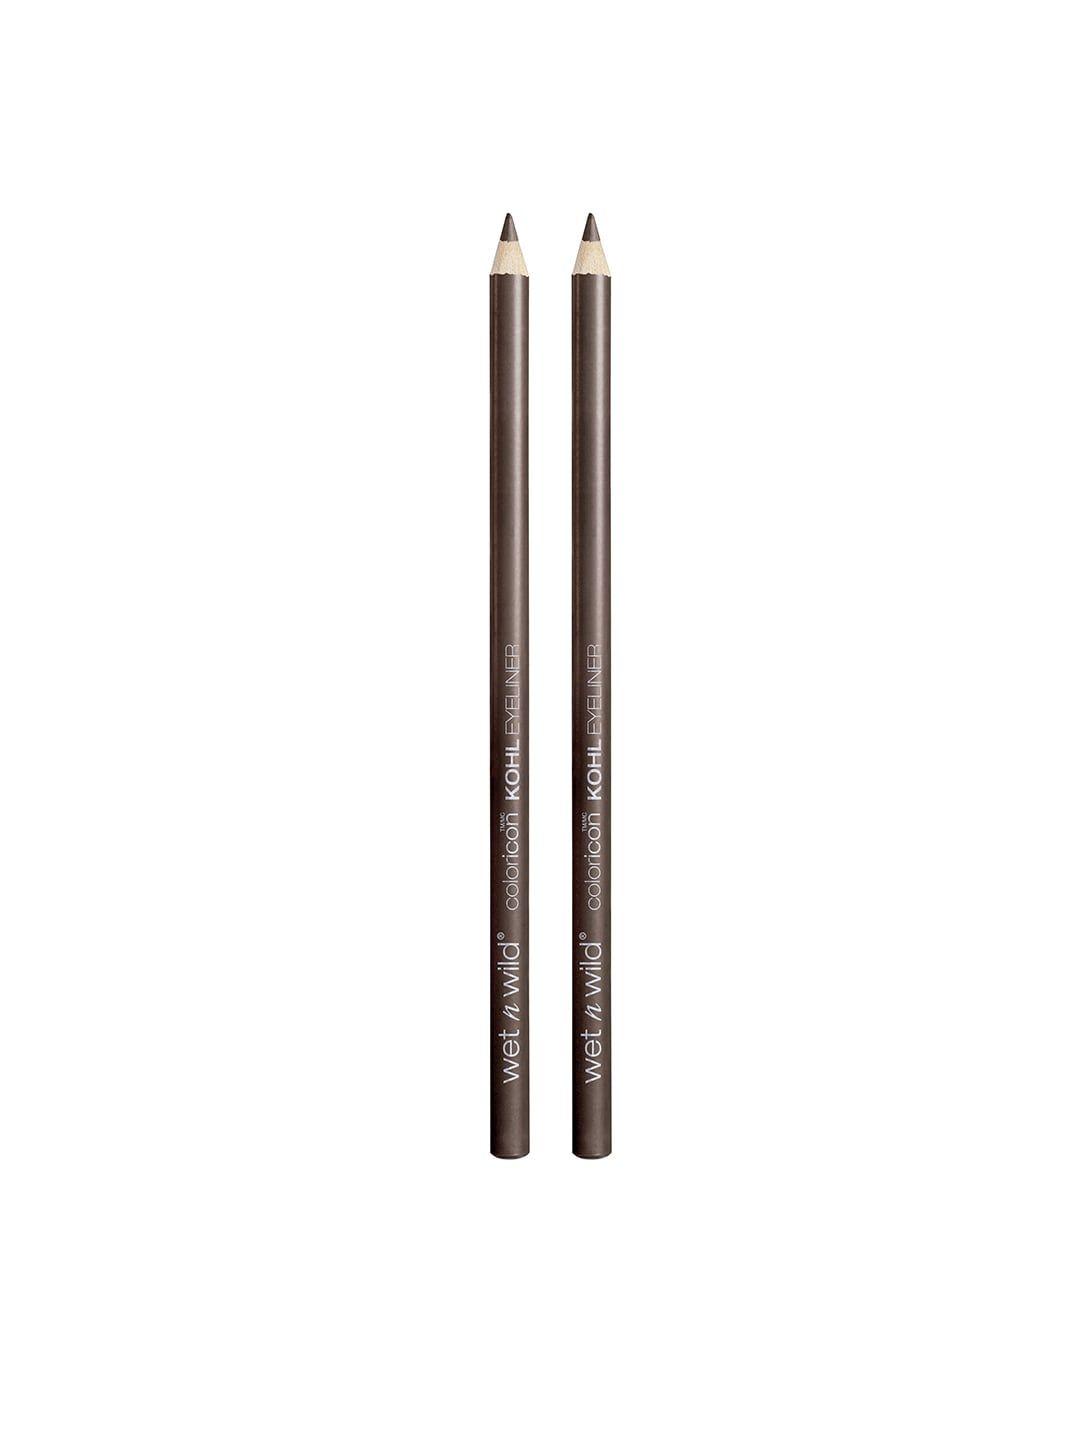 wet n wild pack of 2 pretty in mink color icon kohl liner pencil e602a